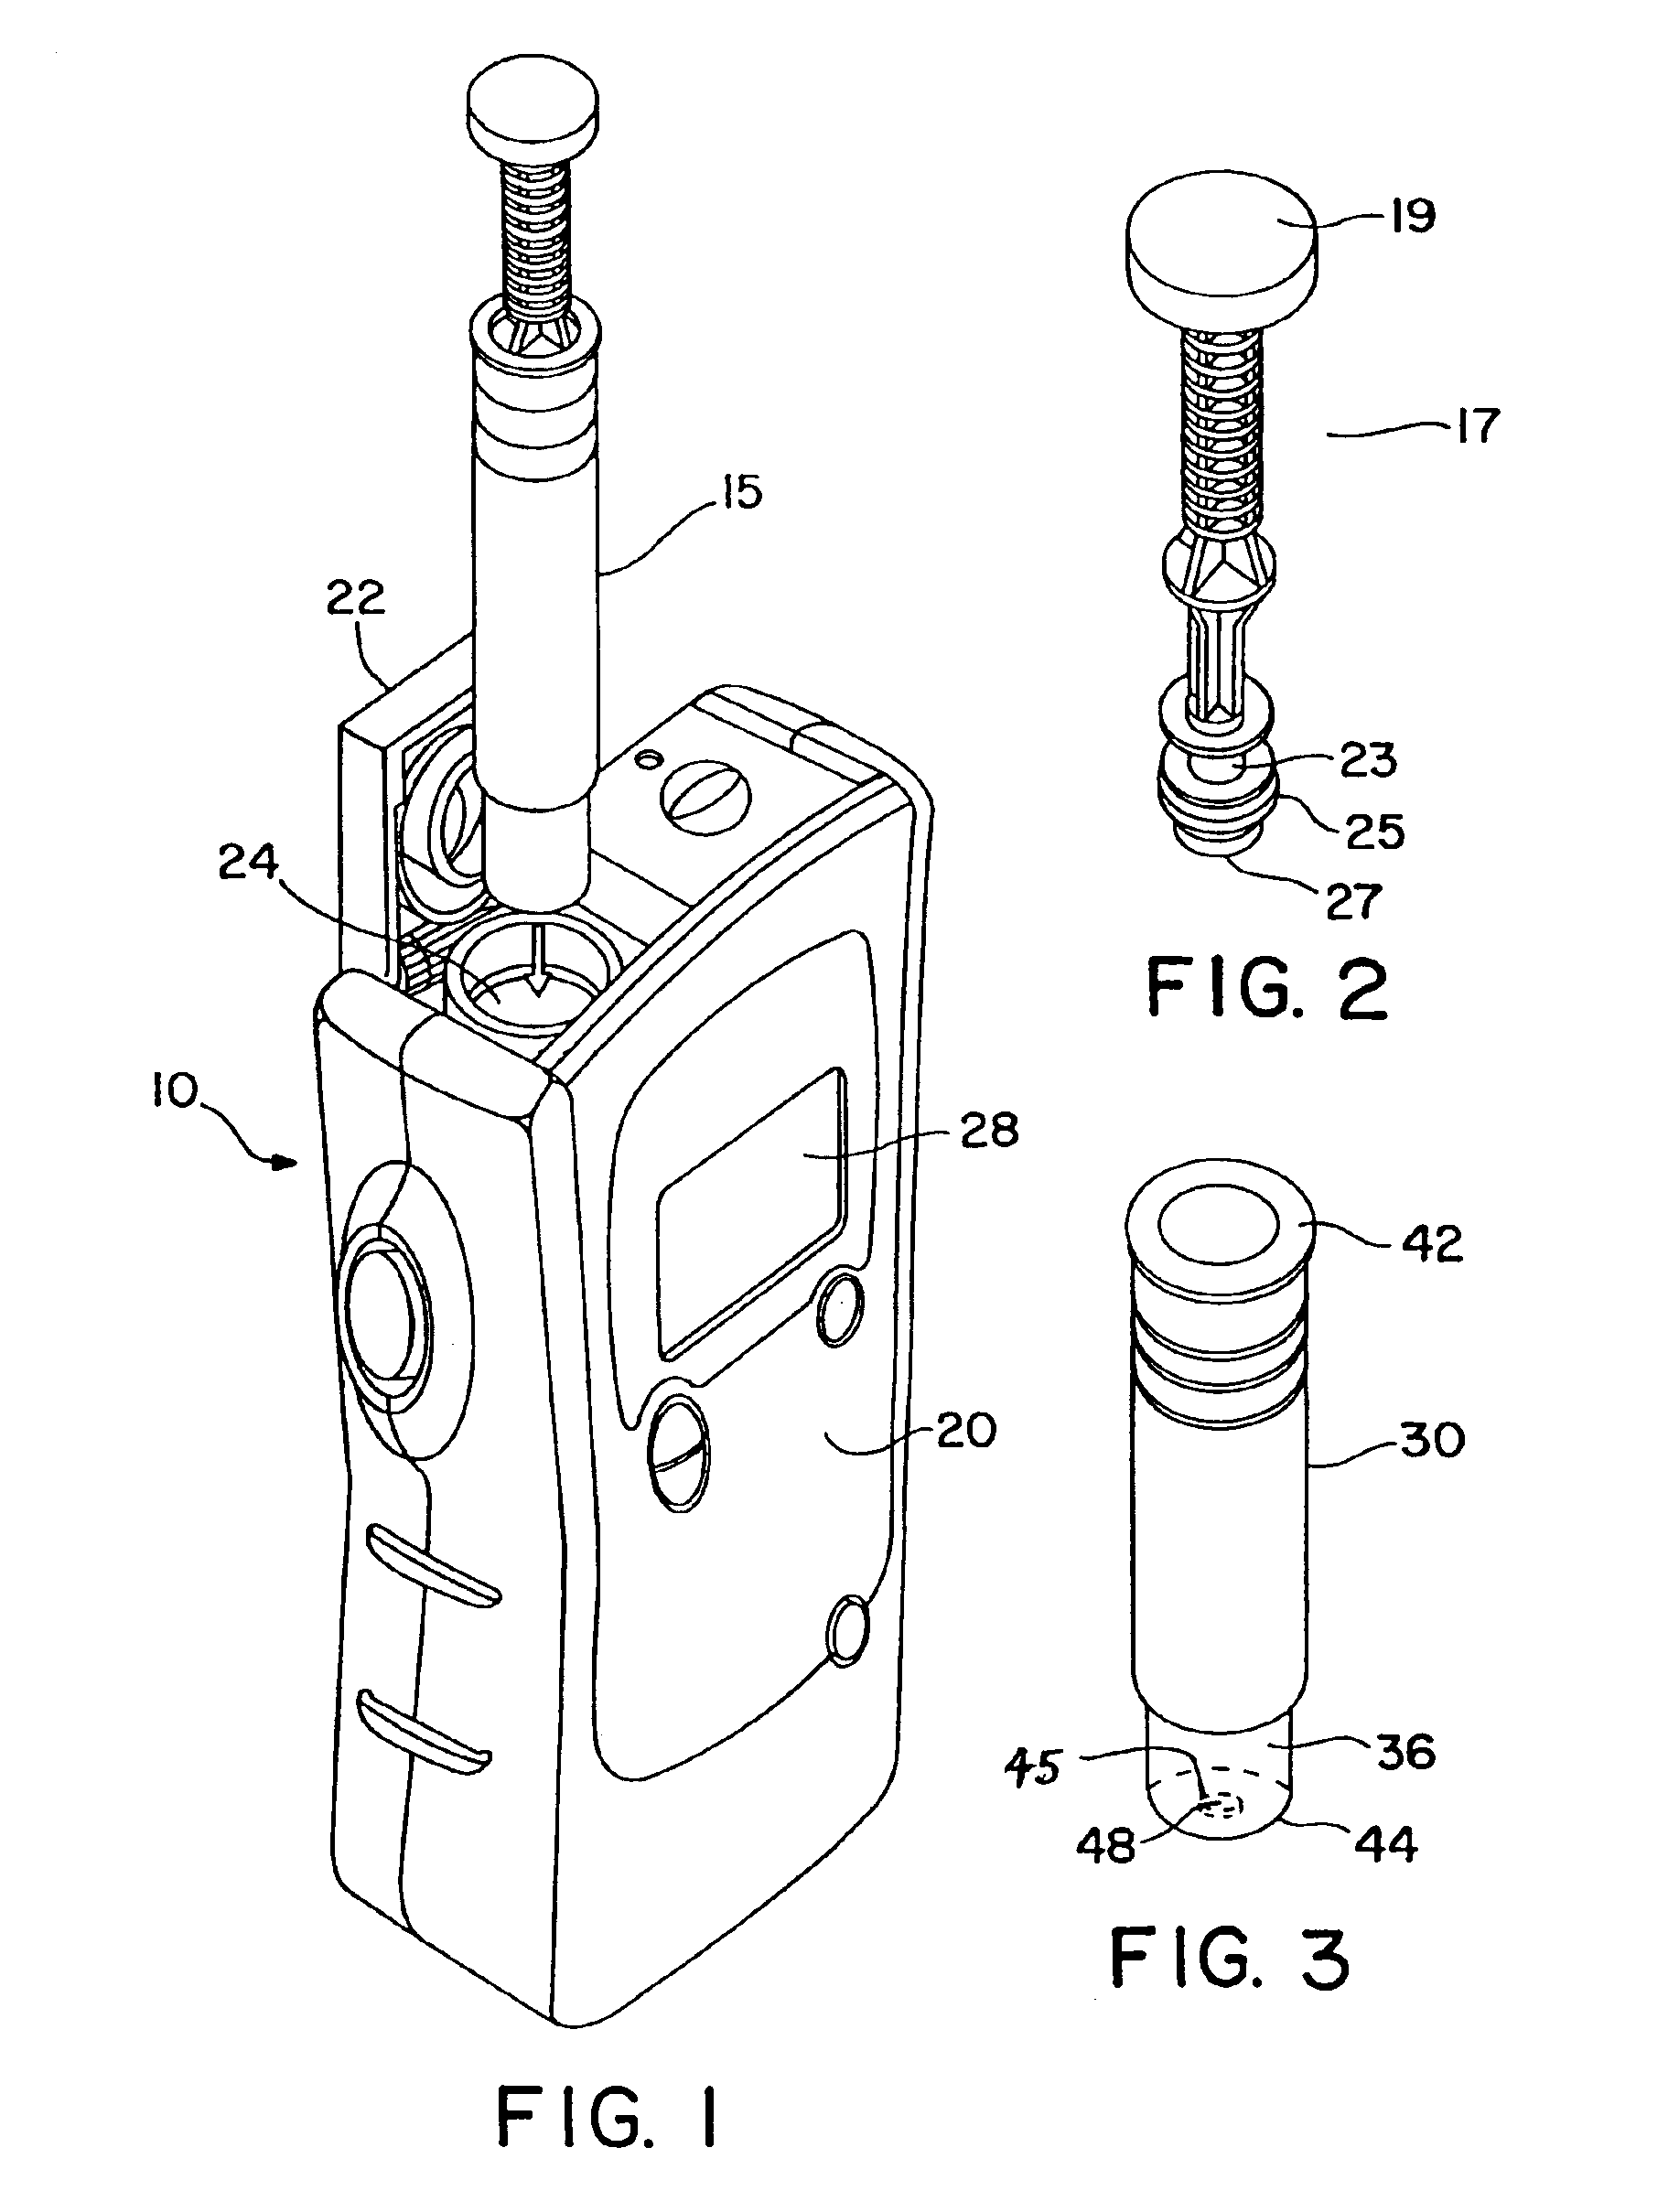 Apparatus and methods for chemiluminescent assays